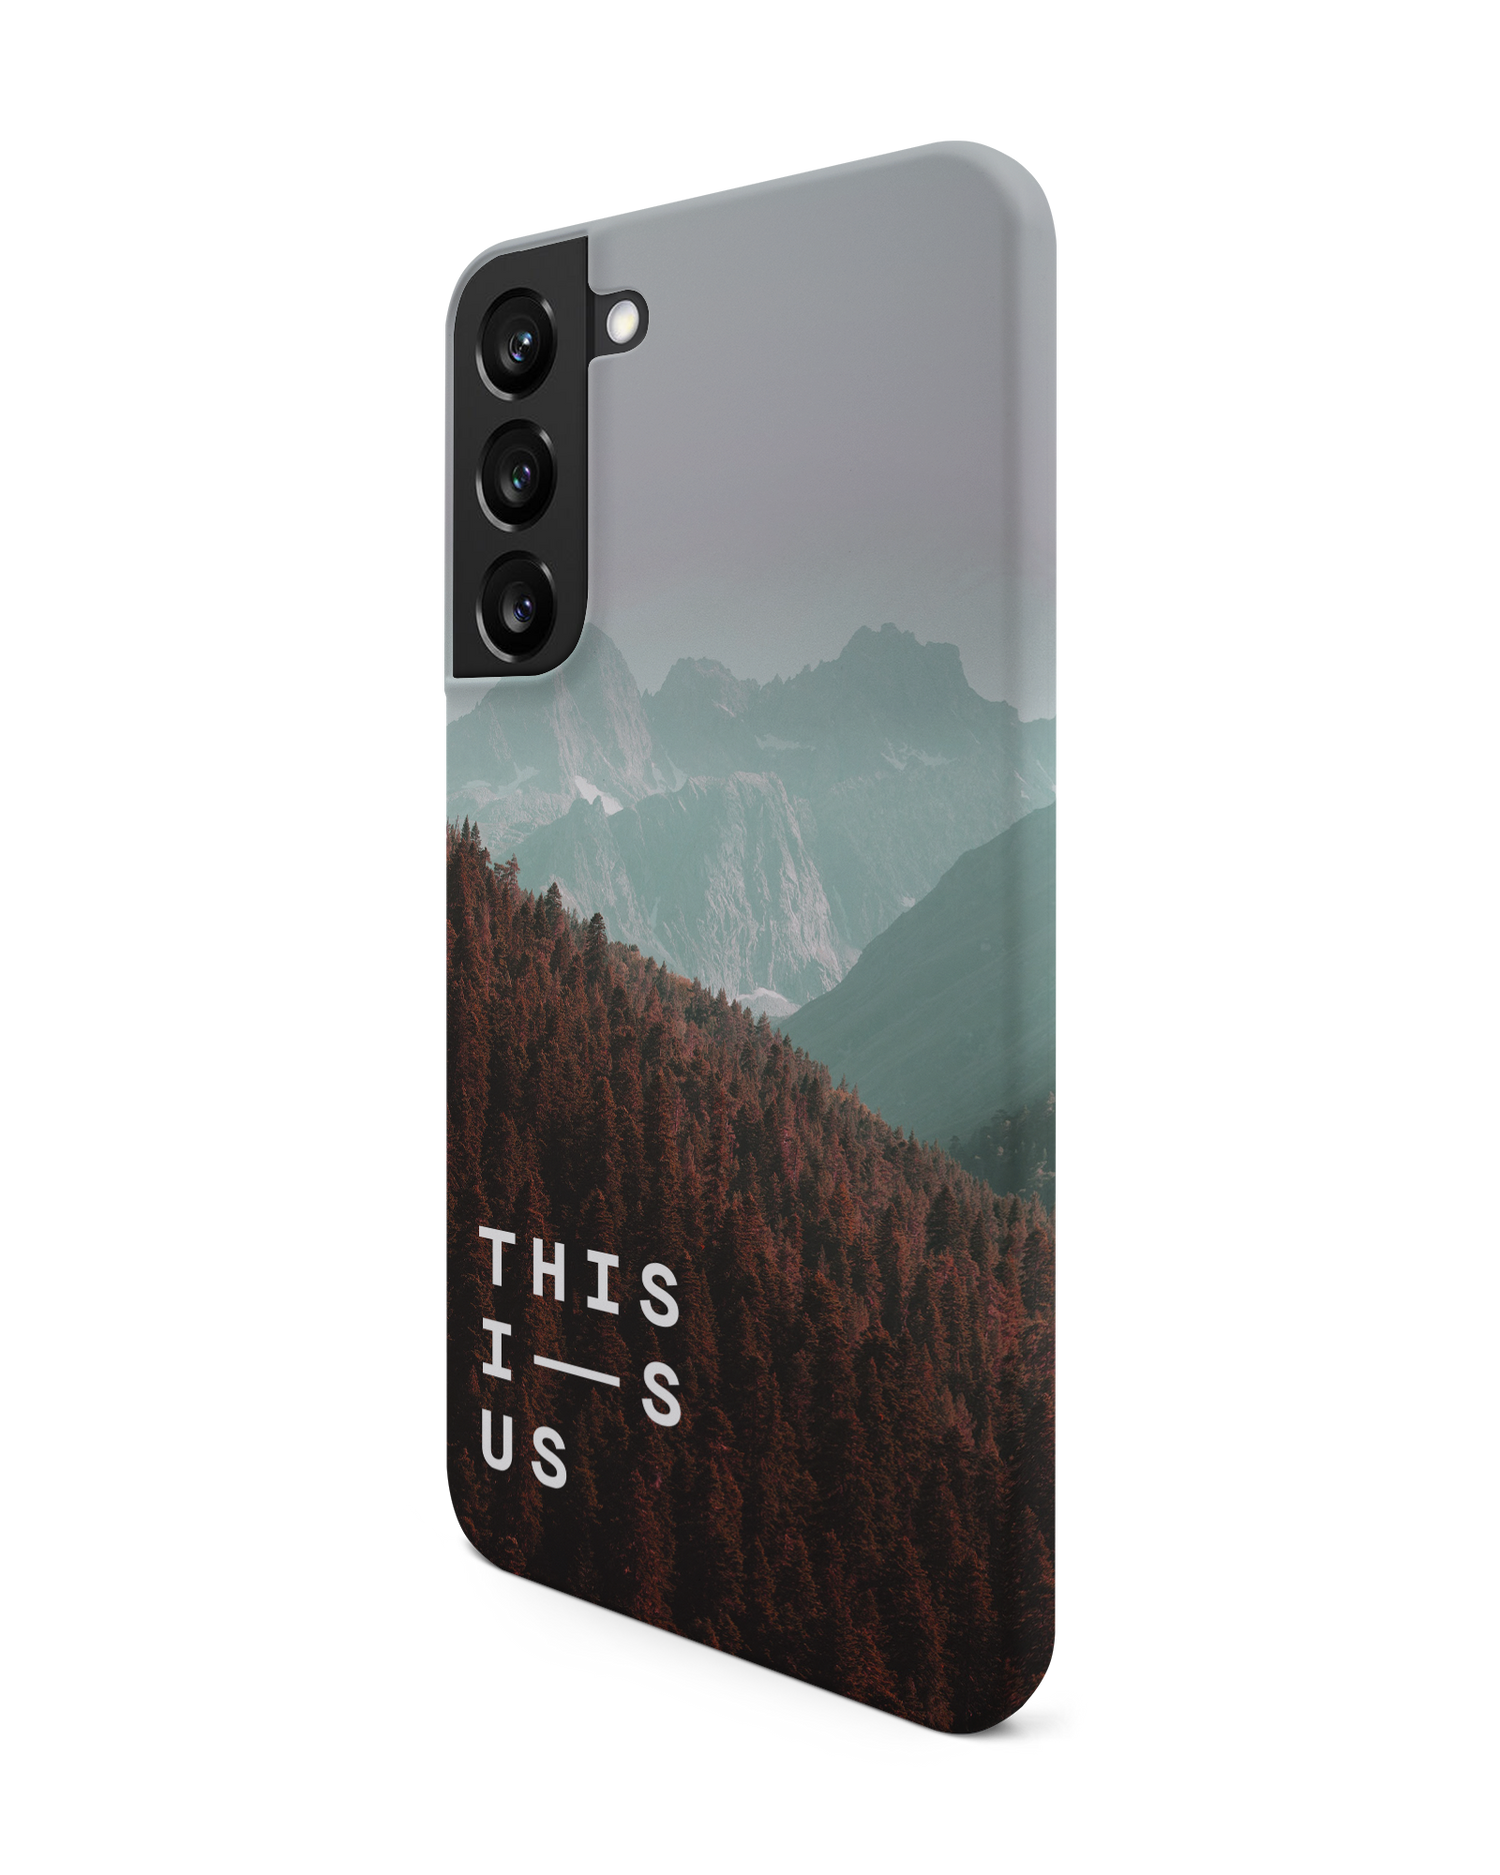 Into the Woods Hard Shell Phone Case Samsung Galaxy S22 Plus 5G: View from the right side